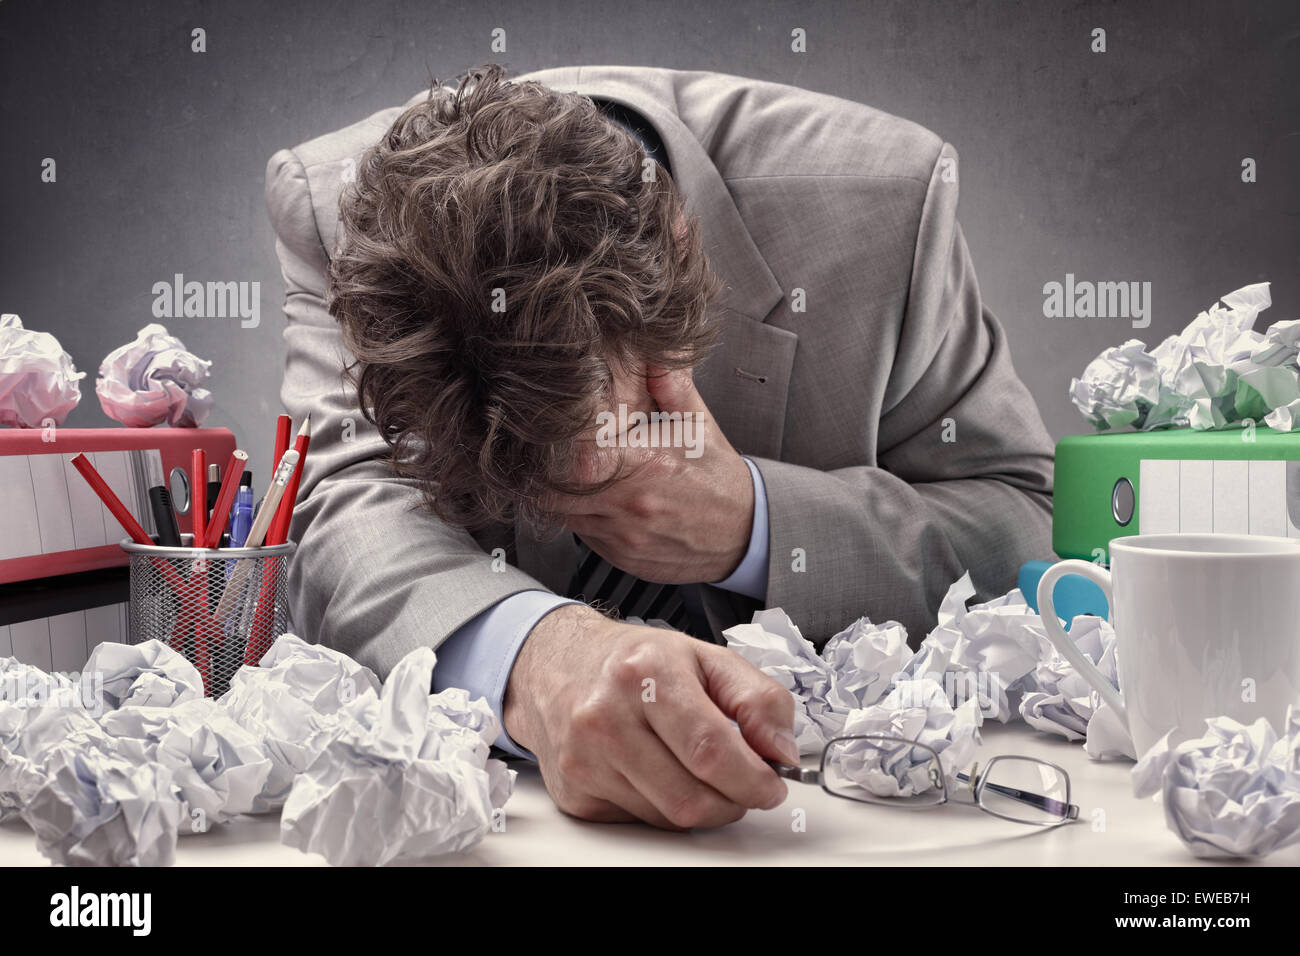 Overworked, depressed and exhausted businessman at his desk with a pile of work or concept for frustration, stress and writers b Stock Photo